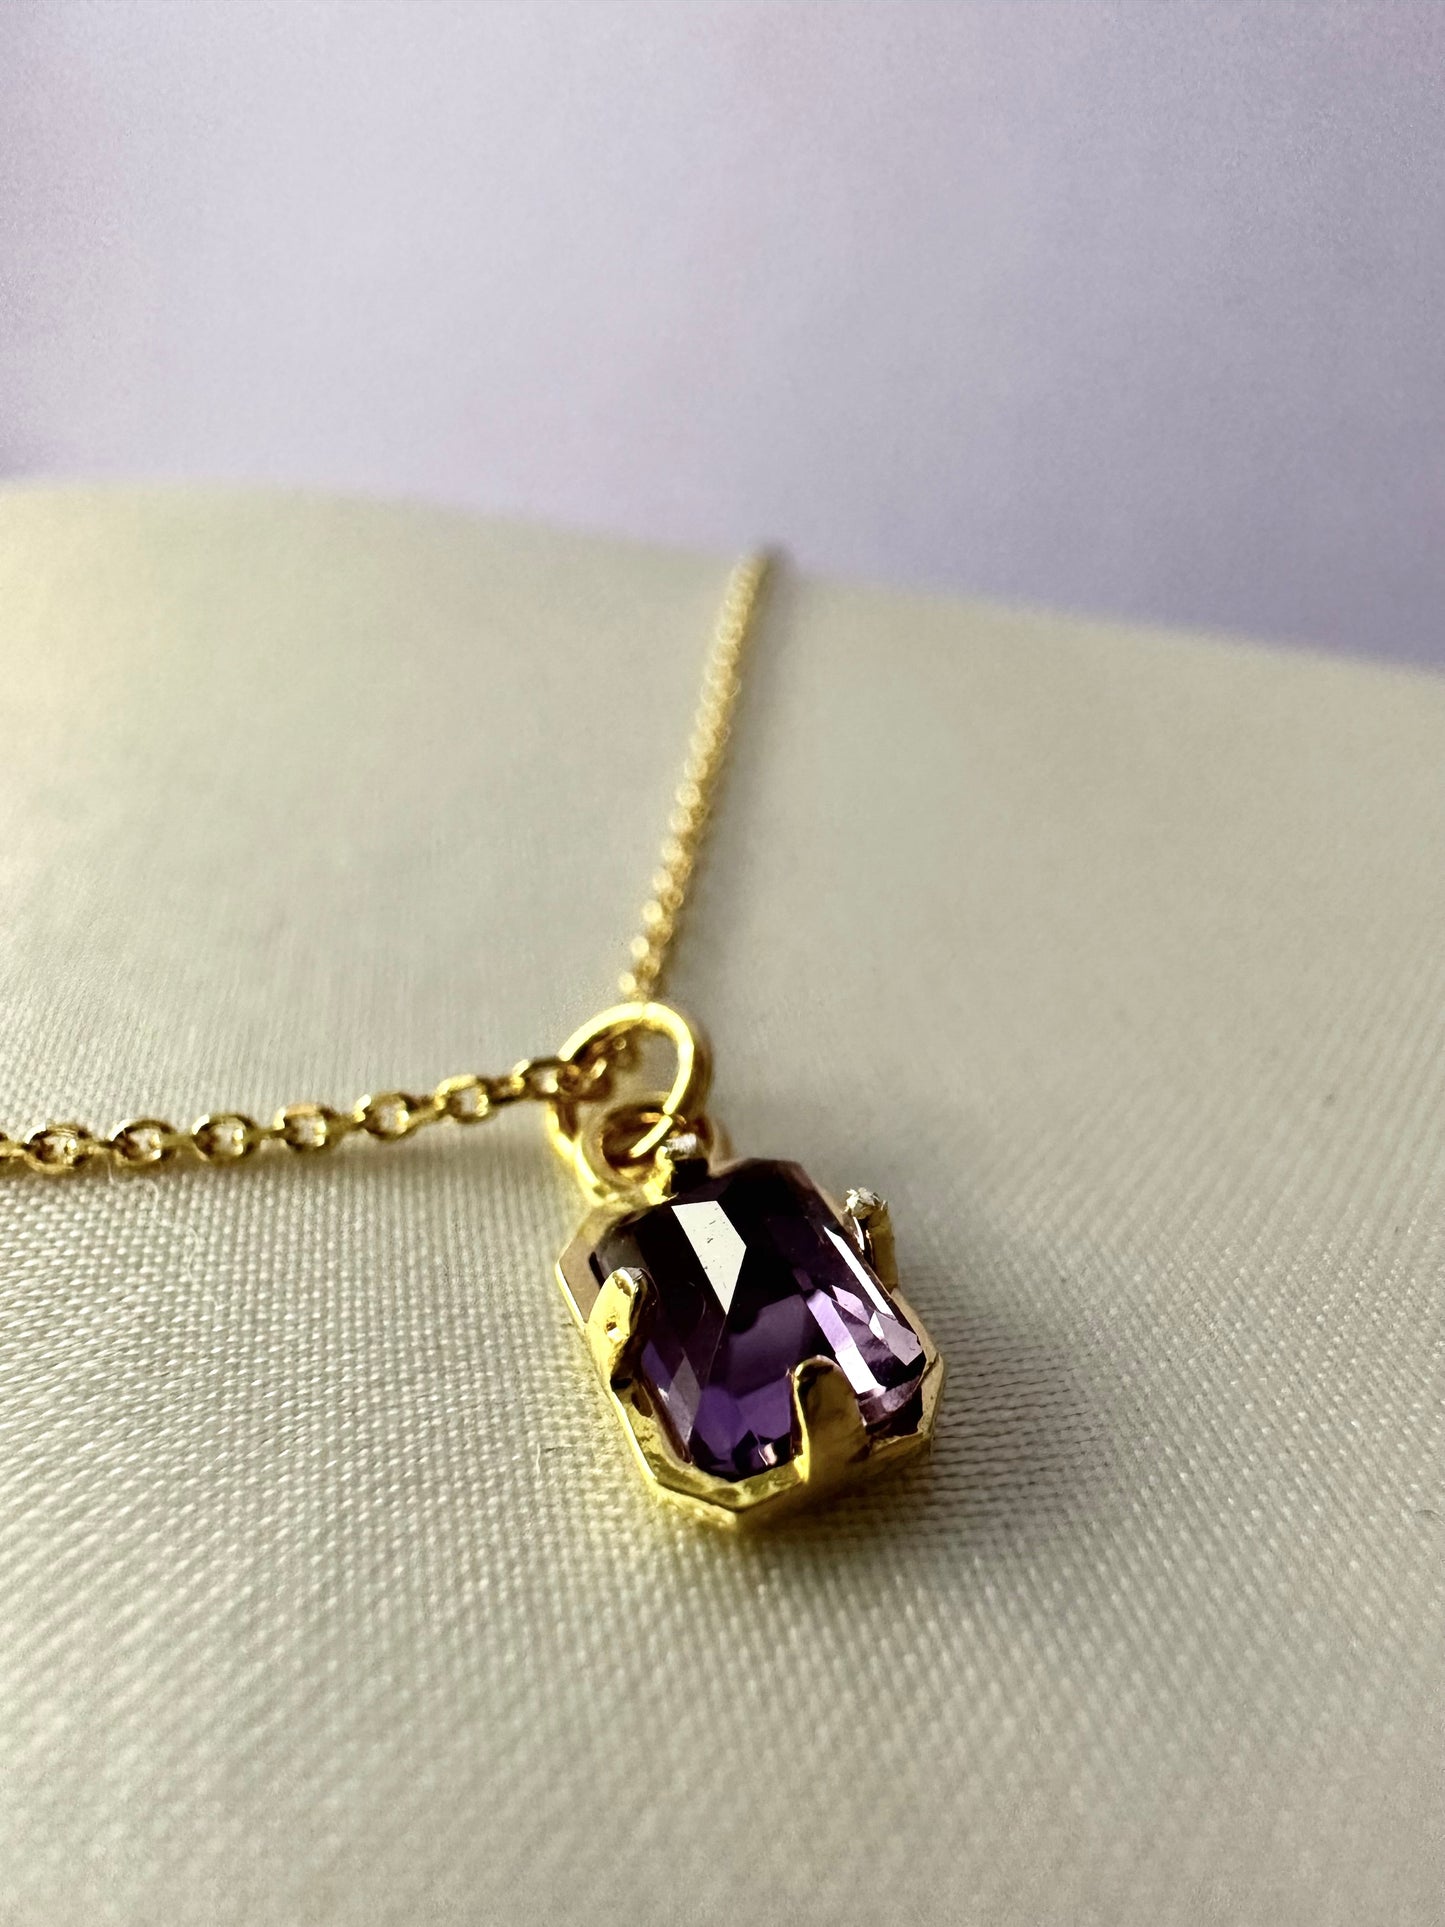 Necklace with Amethyst stone